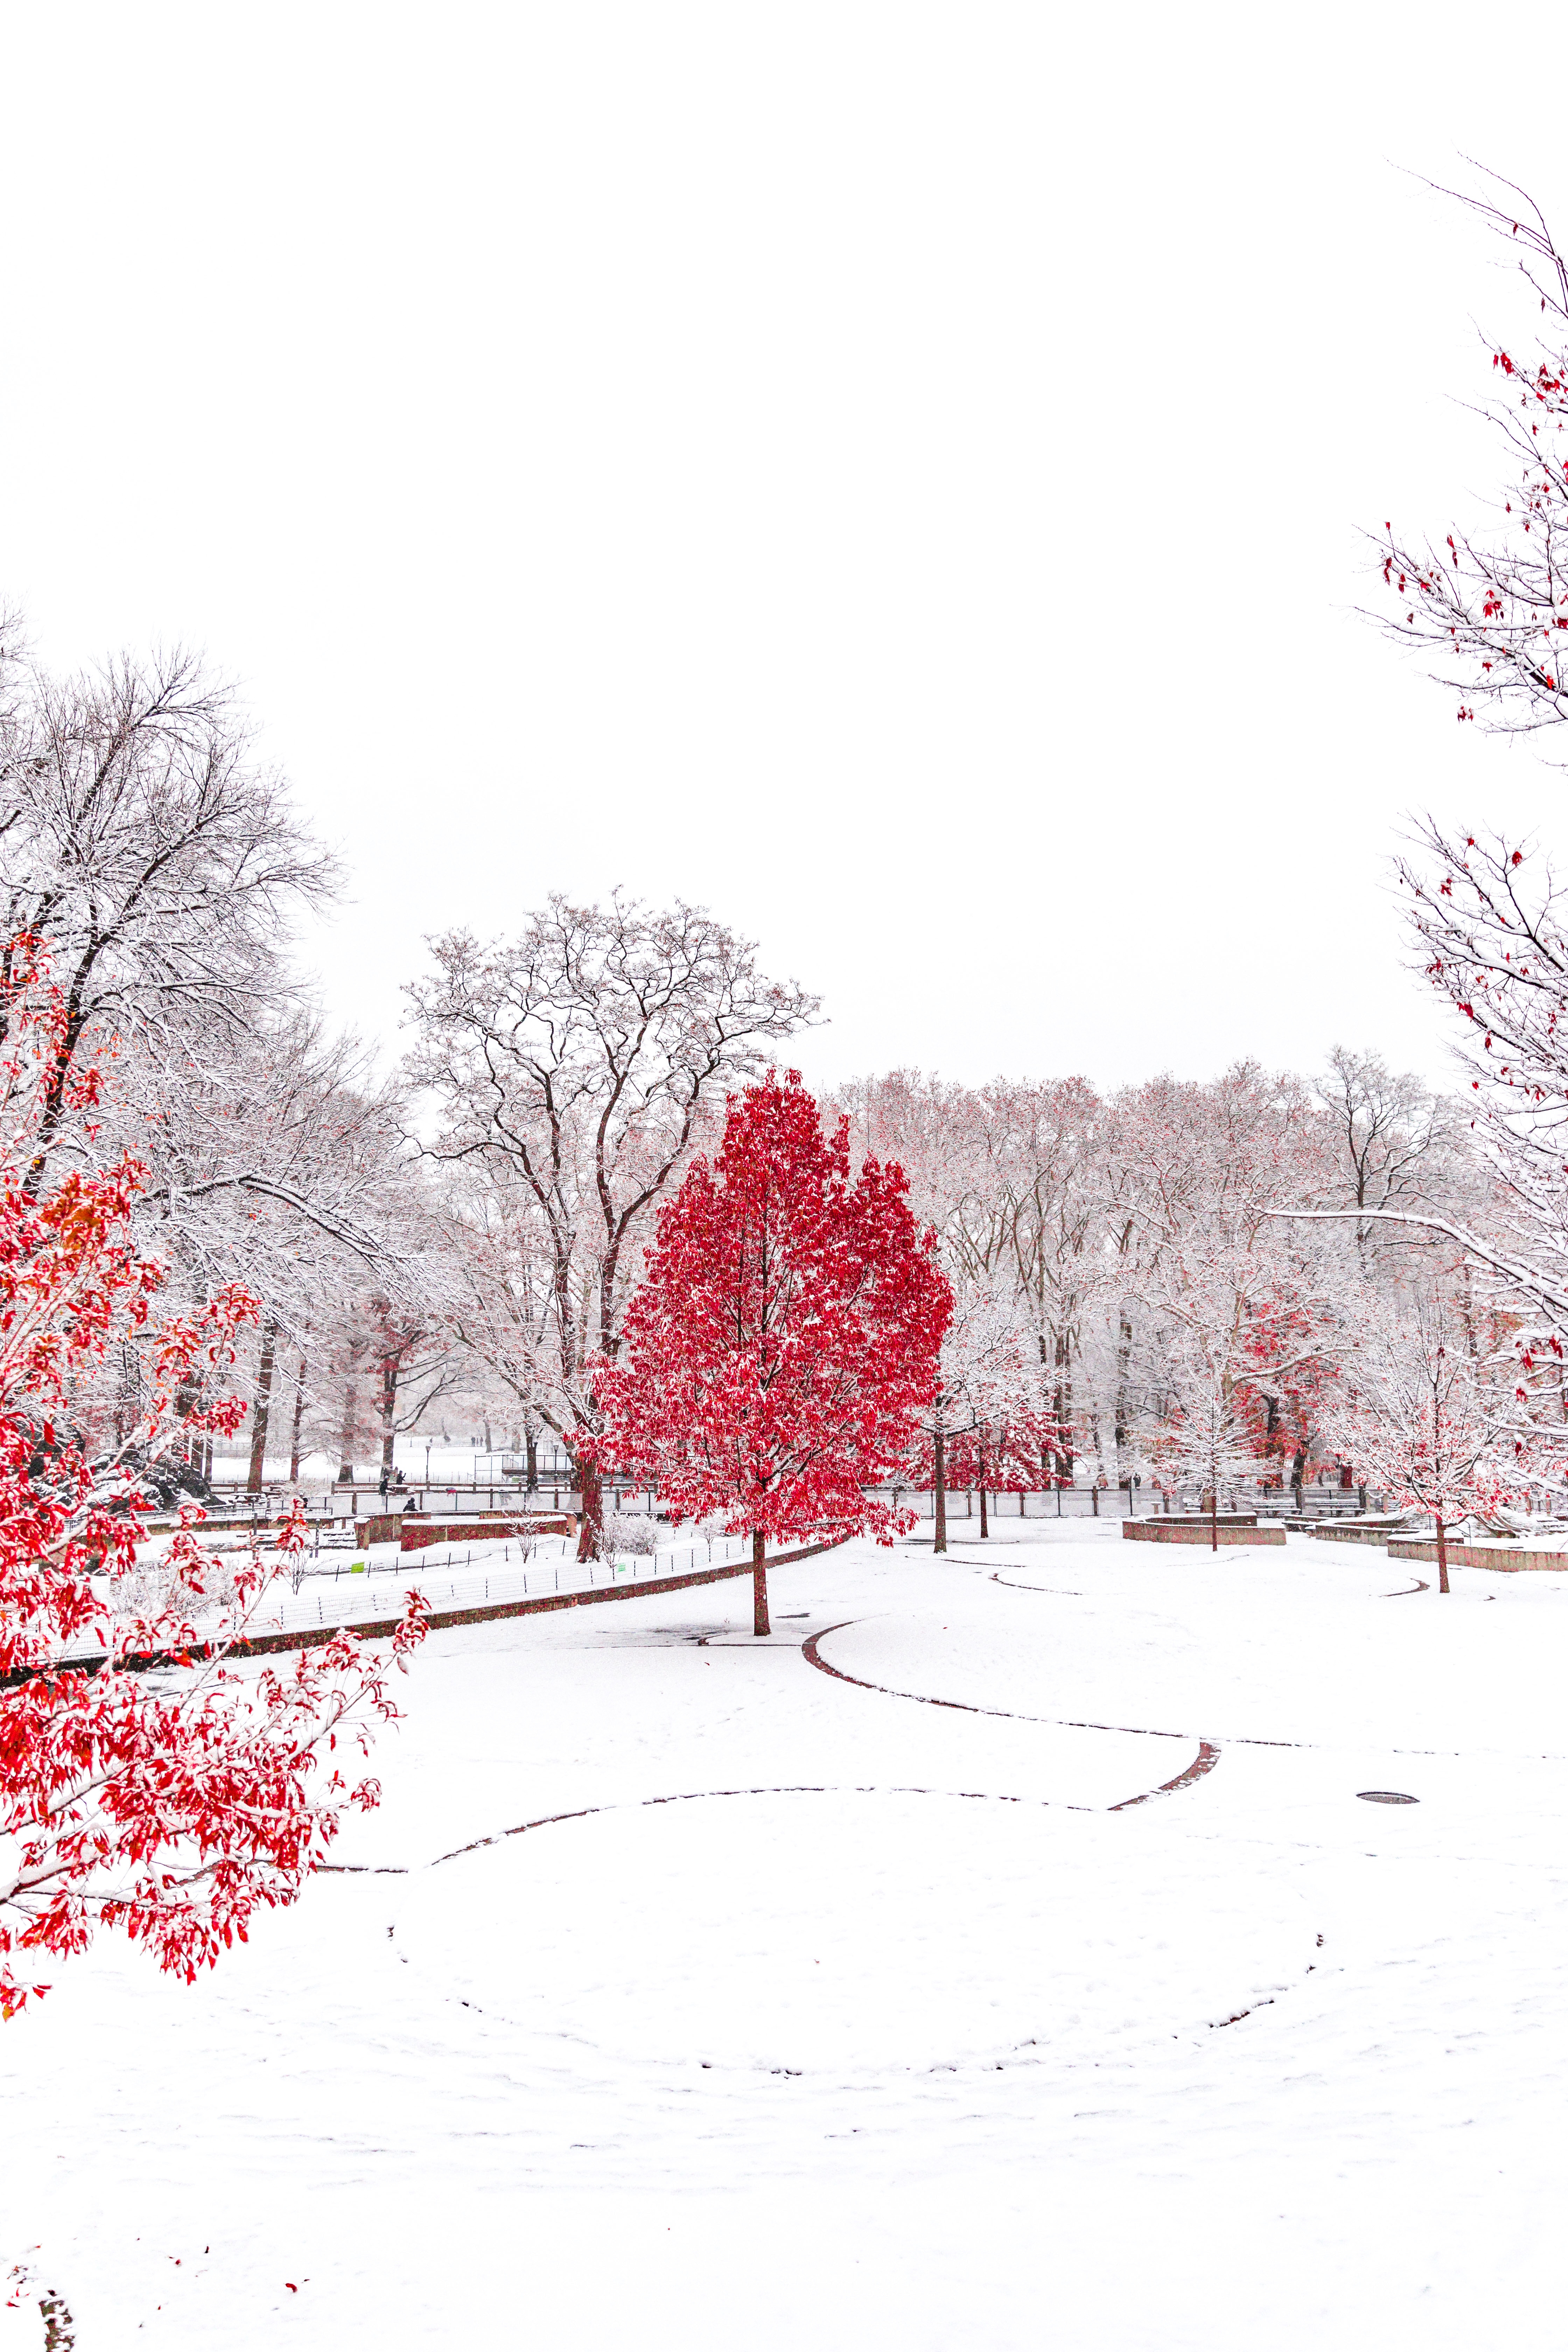 51236 download wallpaper winter, nature, trees, snow, park screensavers and pictures for free